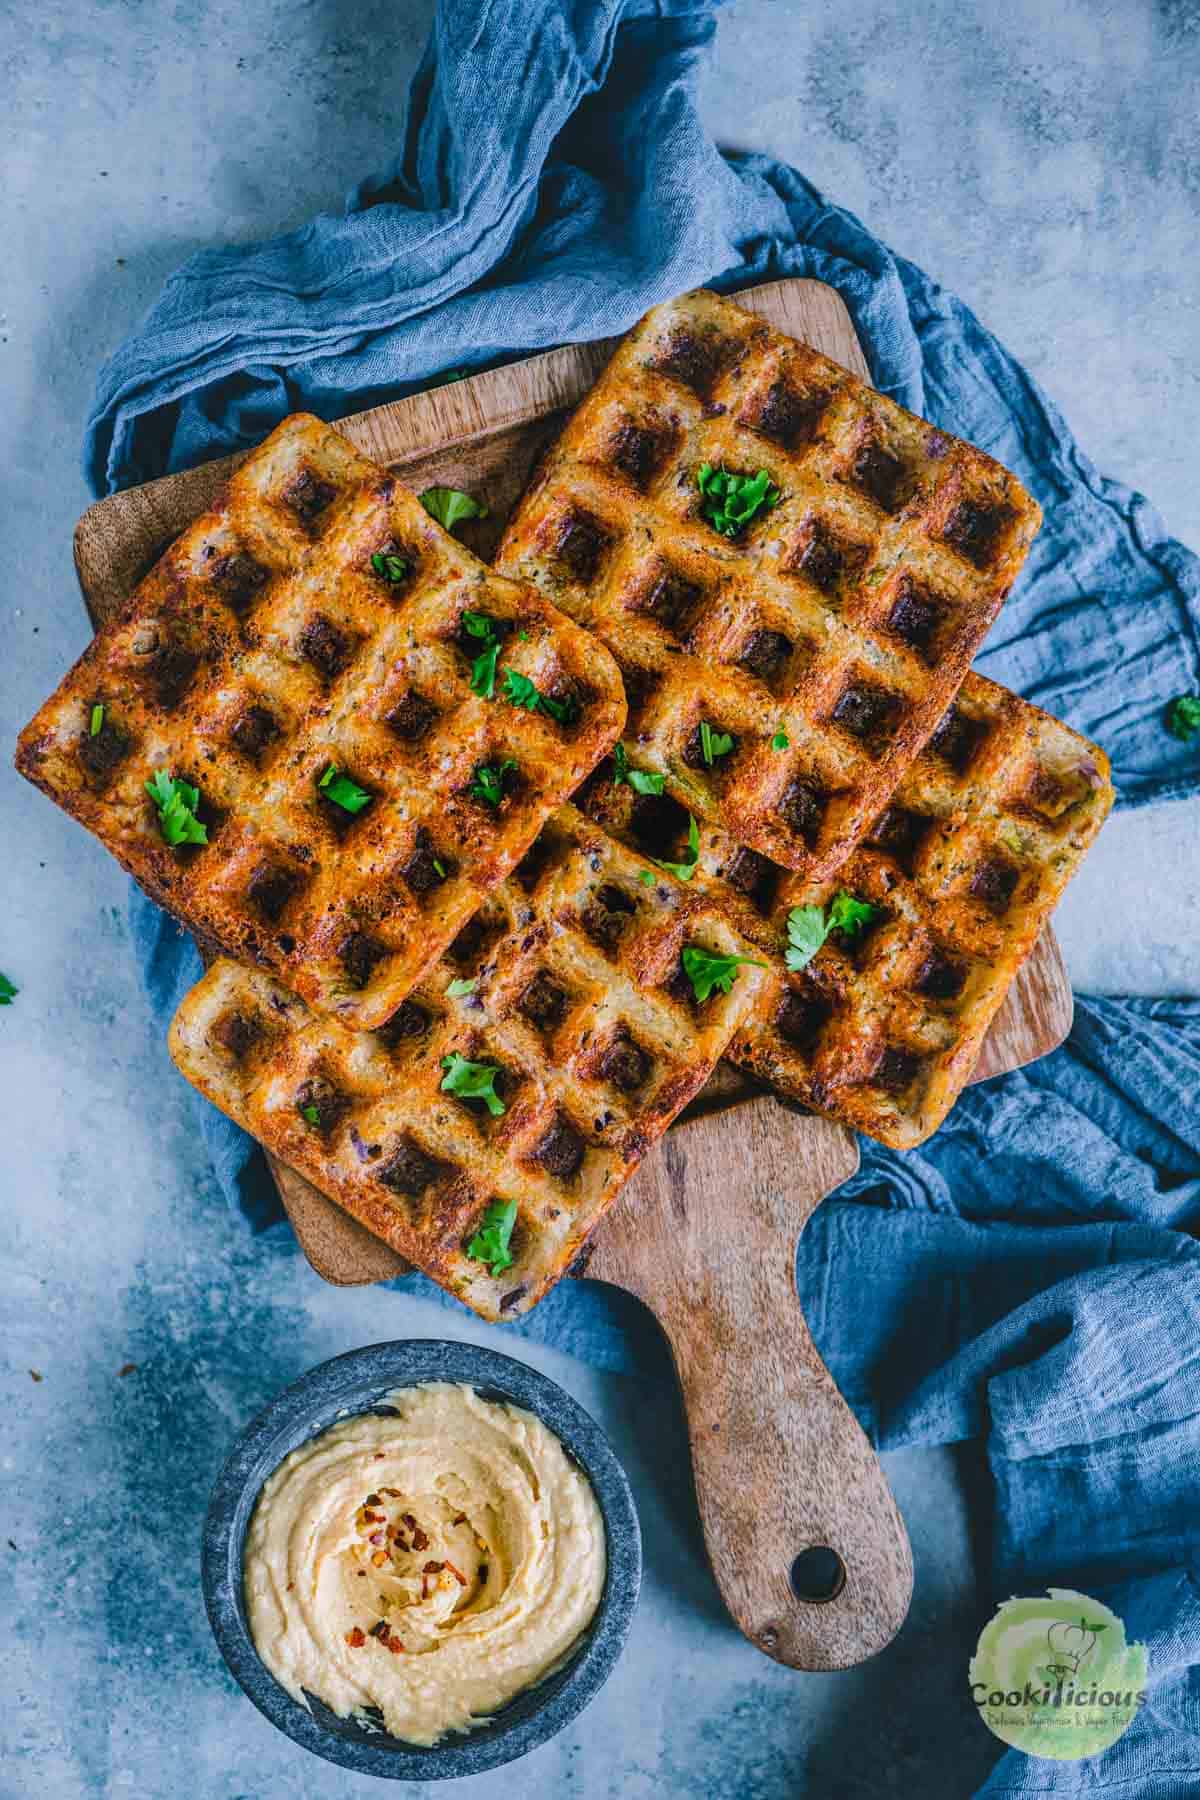 Crispy brown waffles on a wooden board sprinkled with chopped green herbs